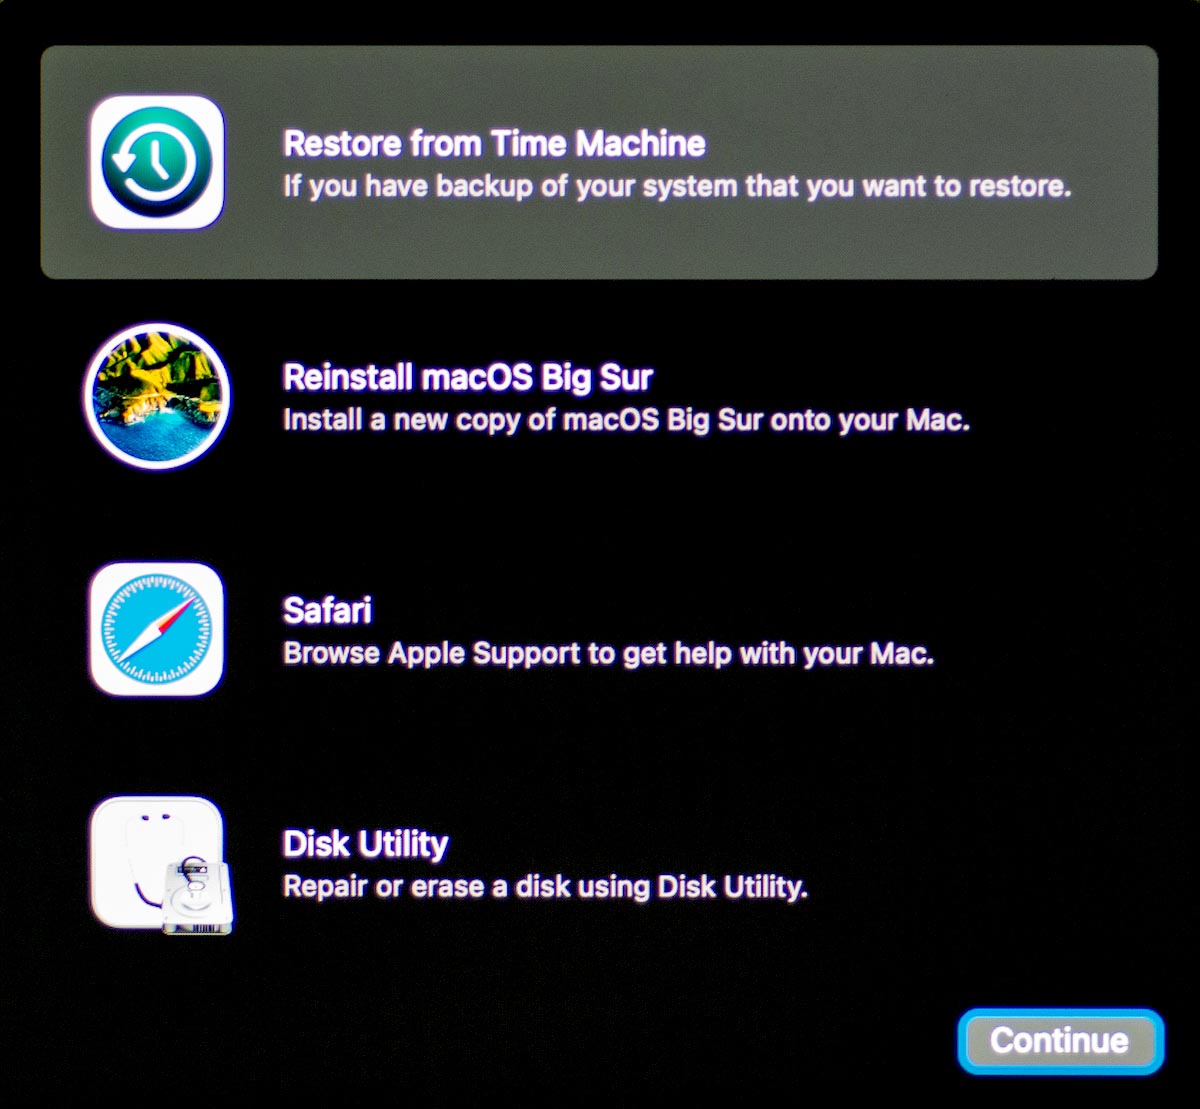 restore from time machine using recovery mode on mac